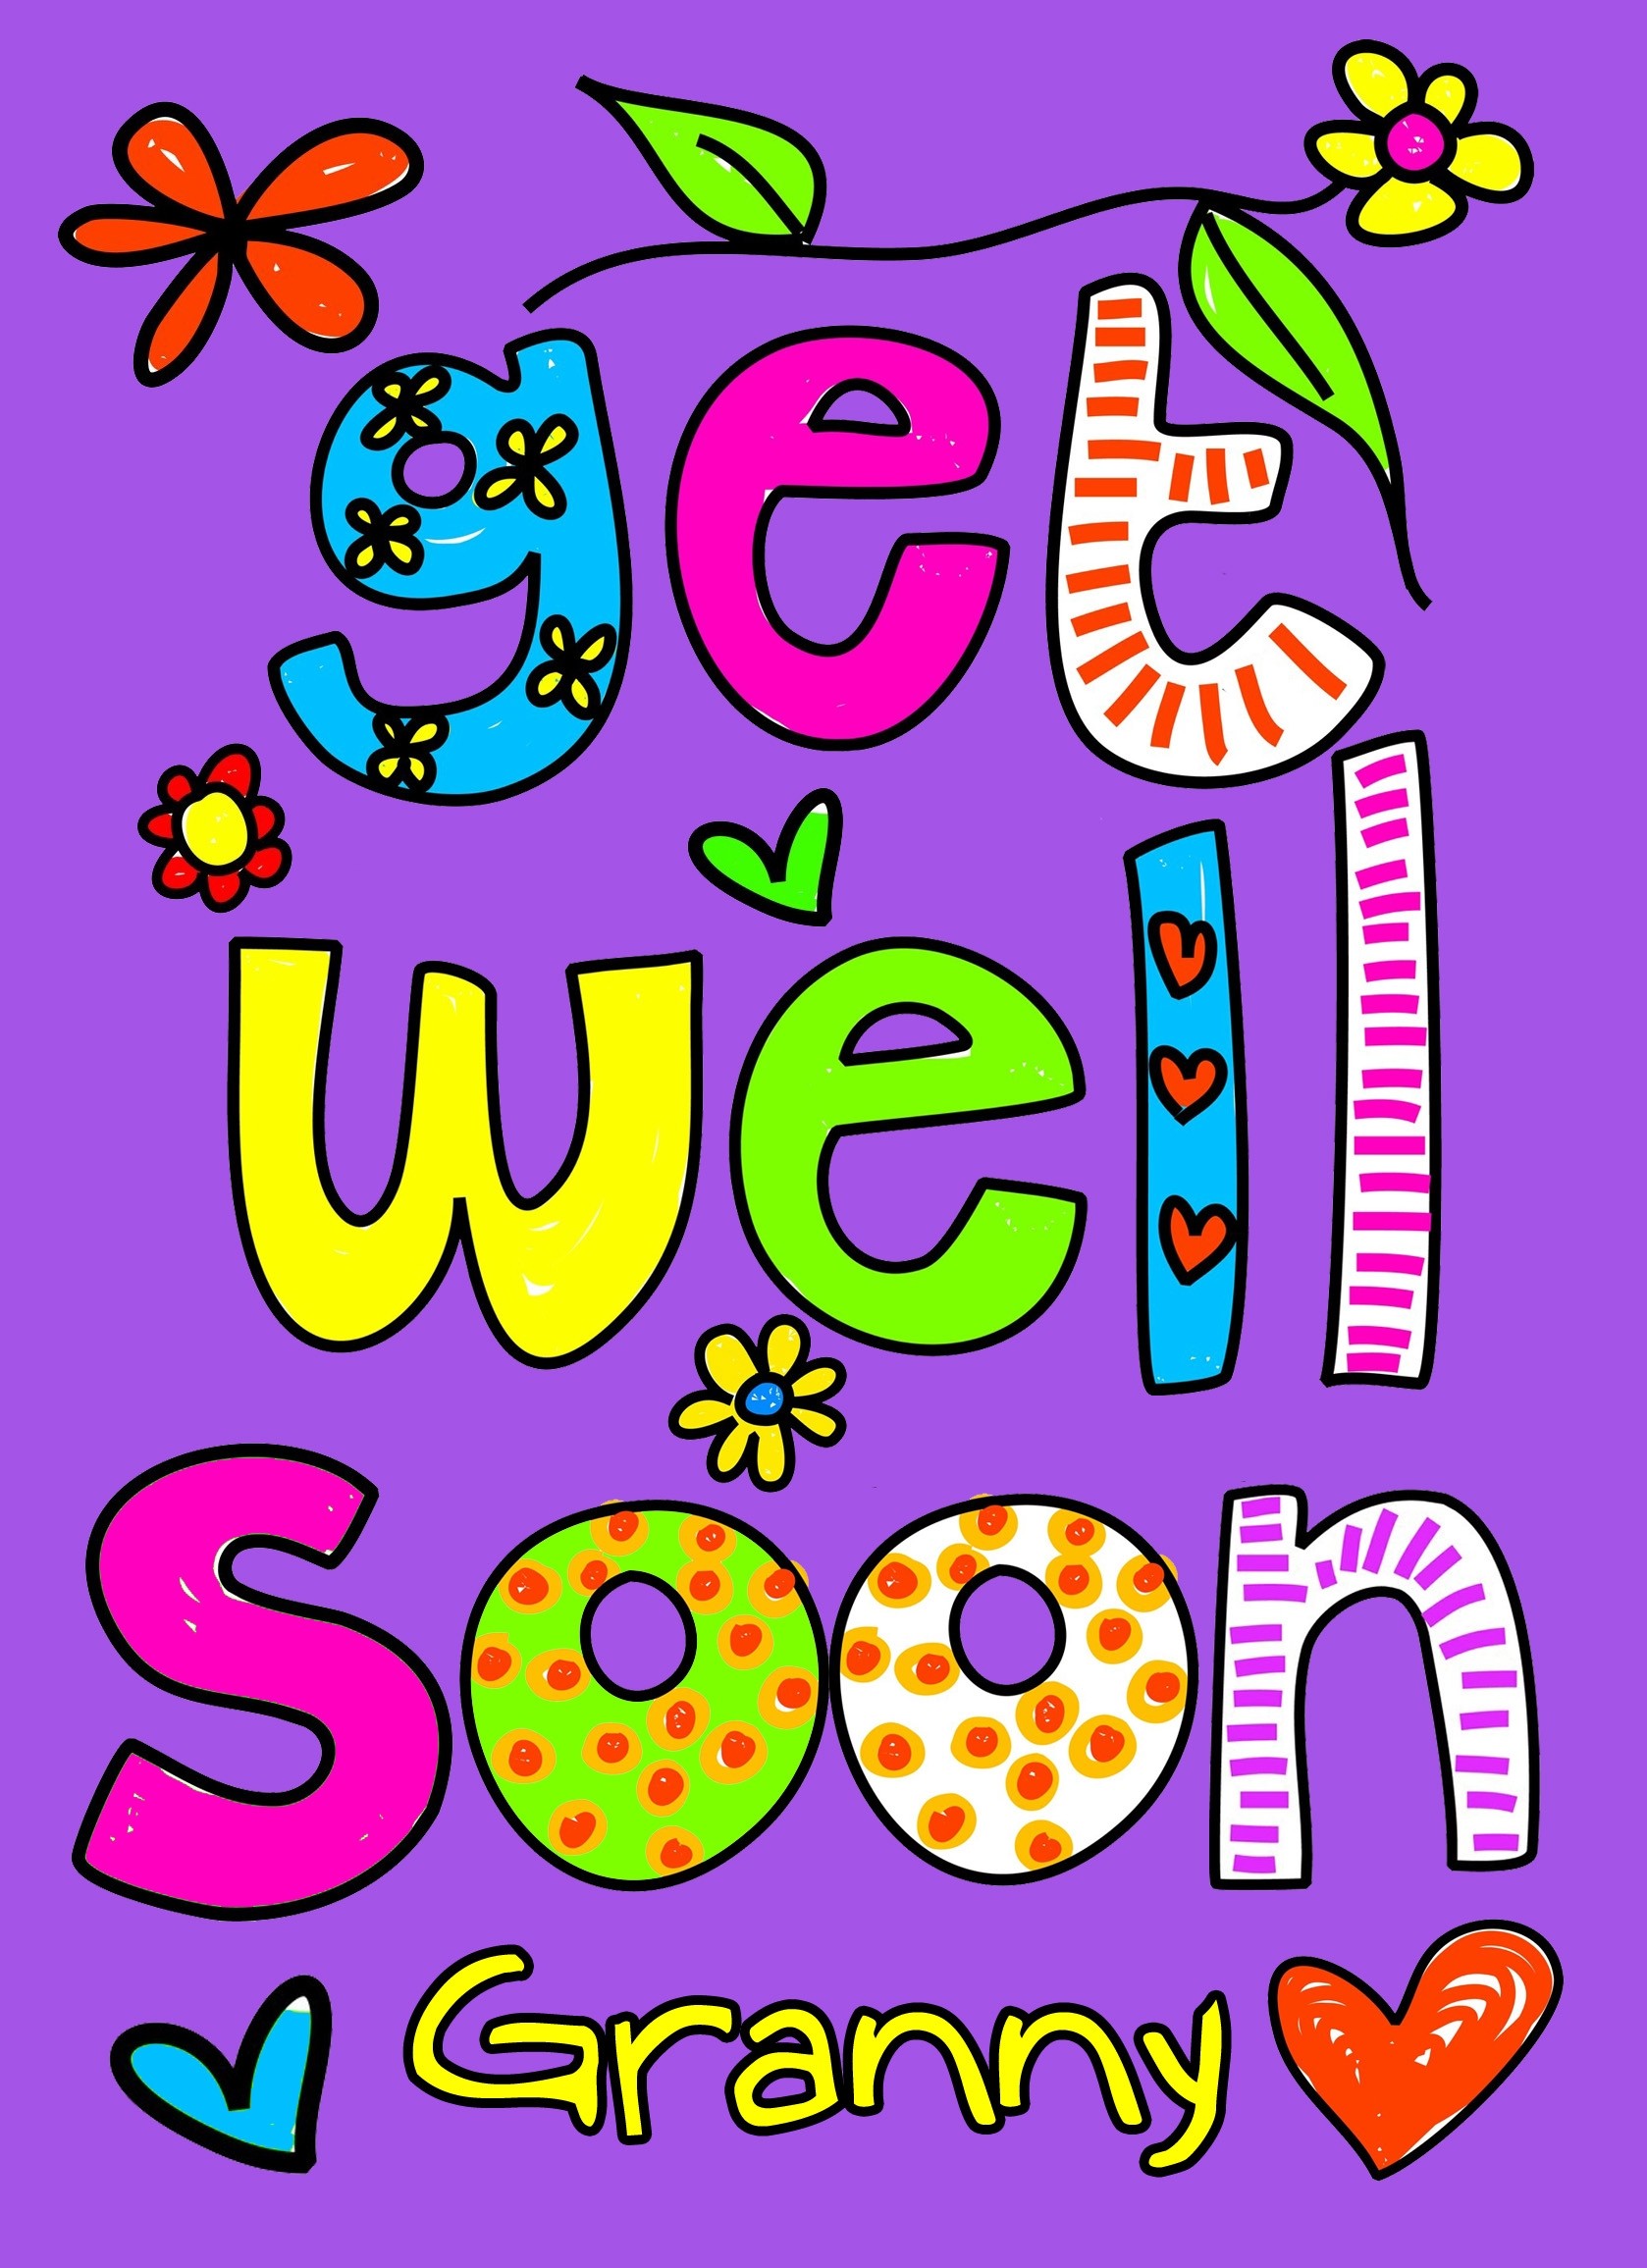 Get Well Soon 'Granny' Greeting Card